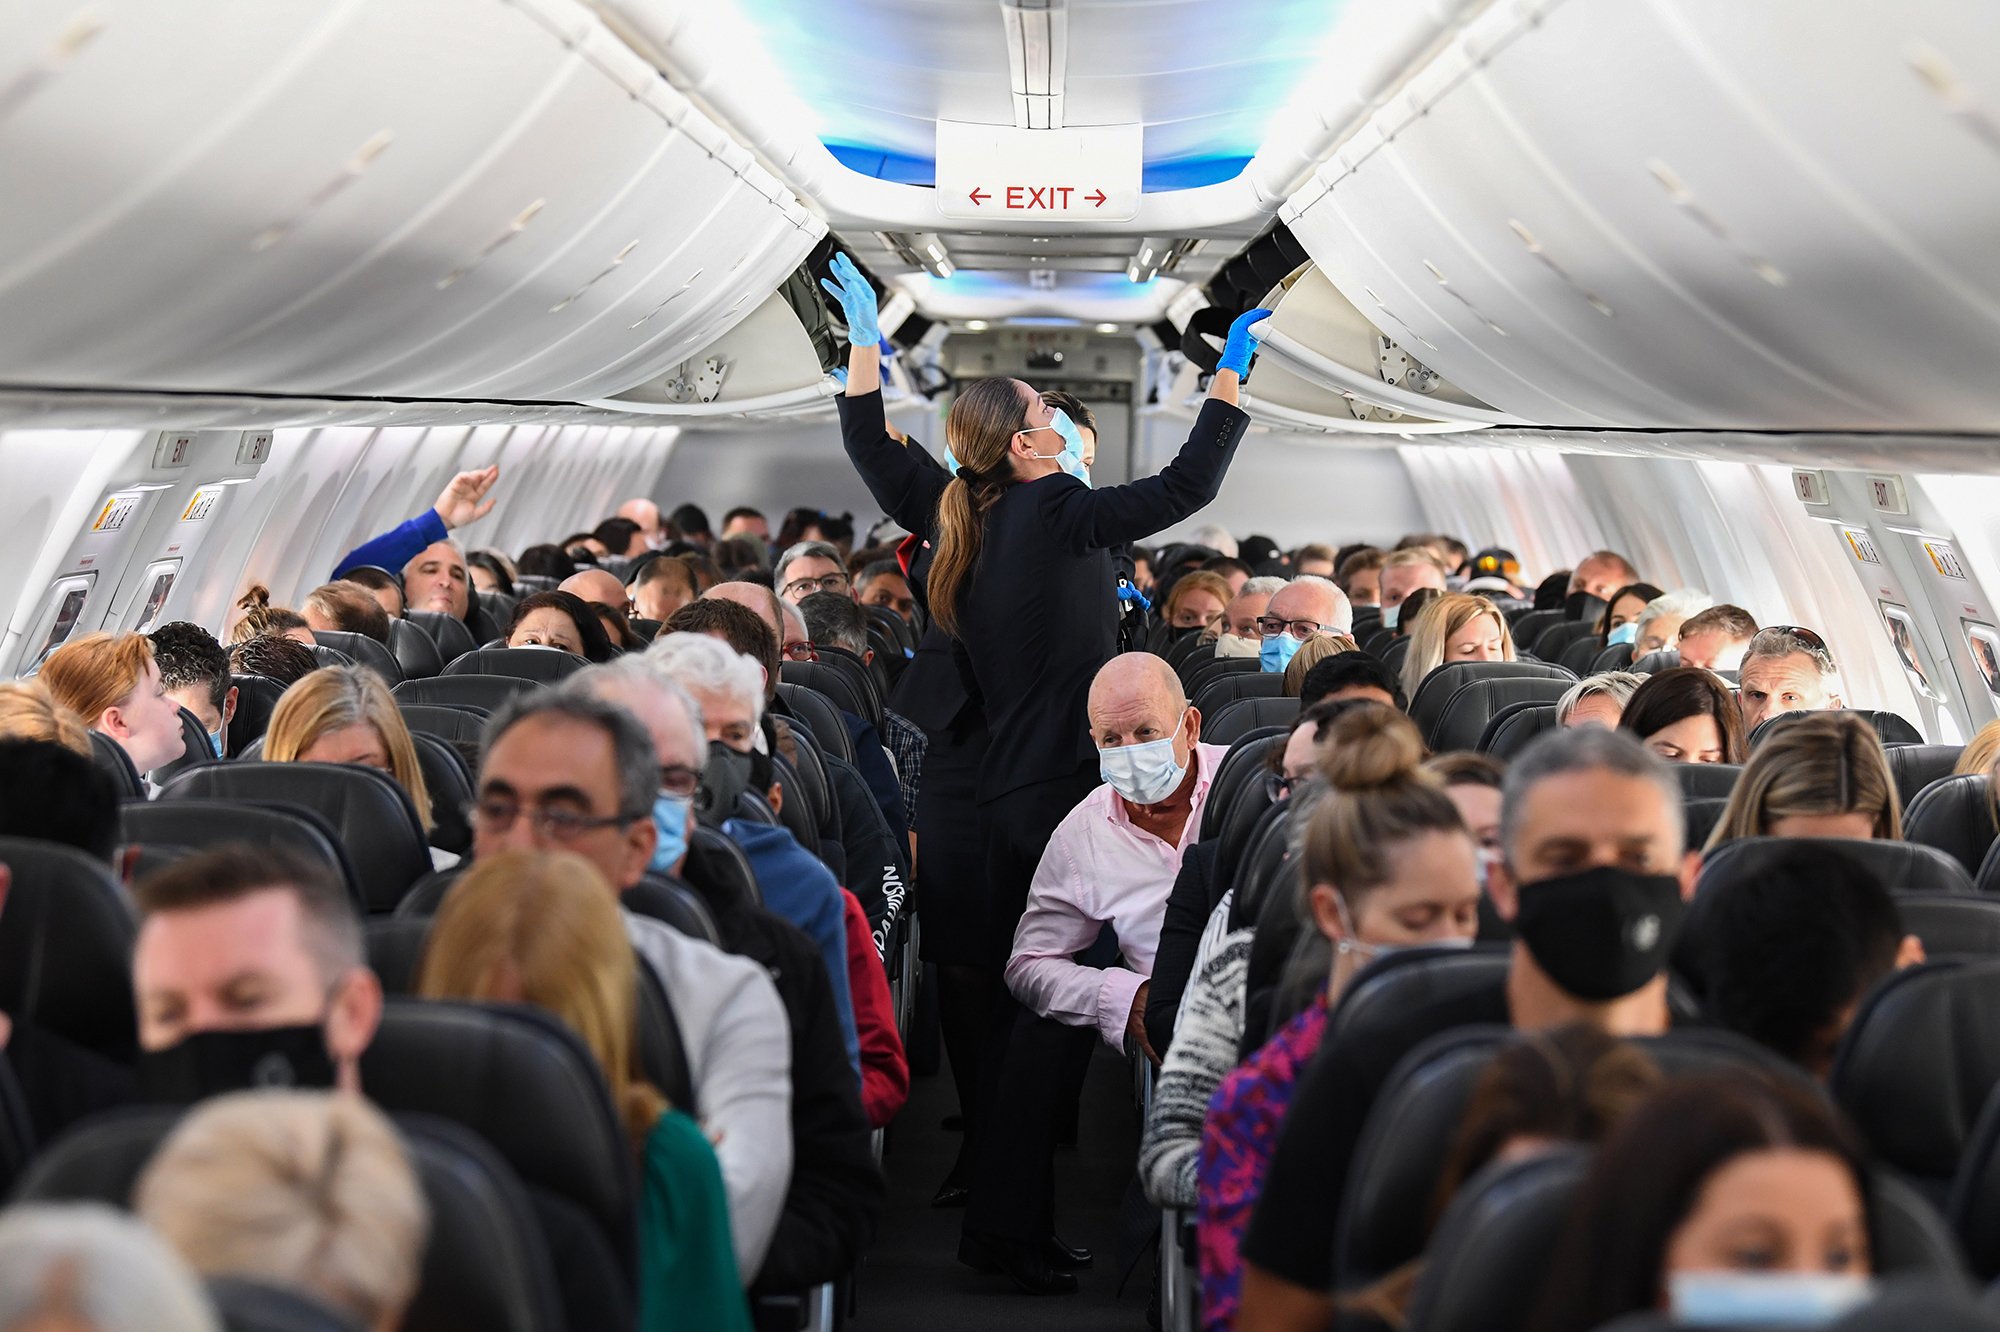 Do Masks On Plane Flights Really Cut Your Risk Of Catching COVID-19?